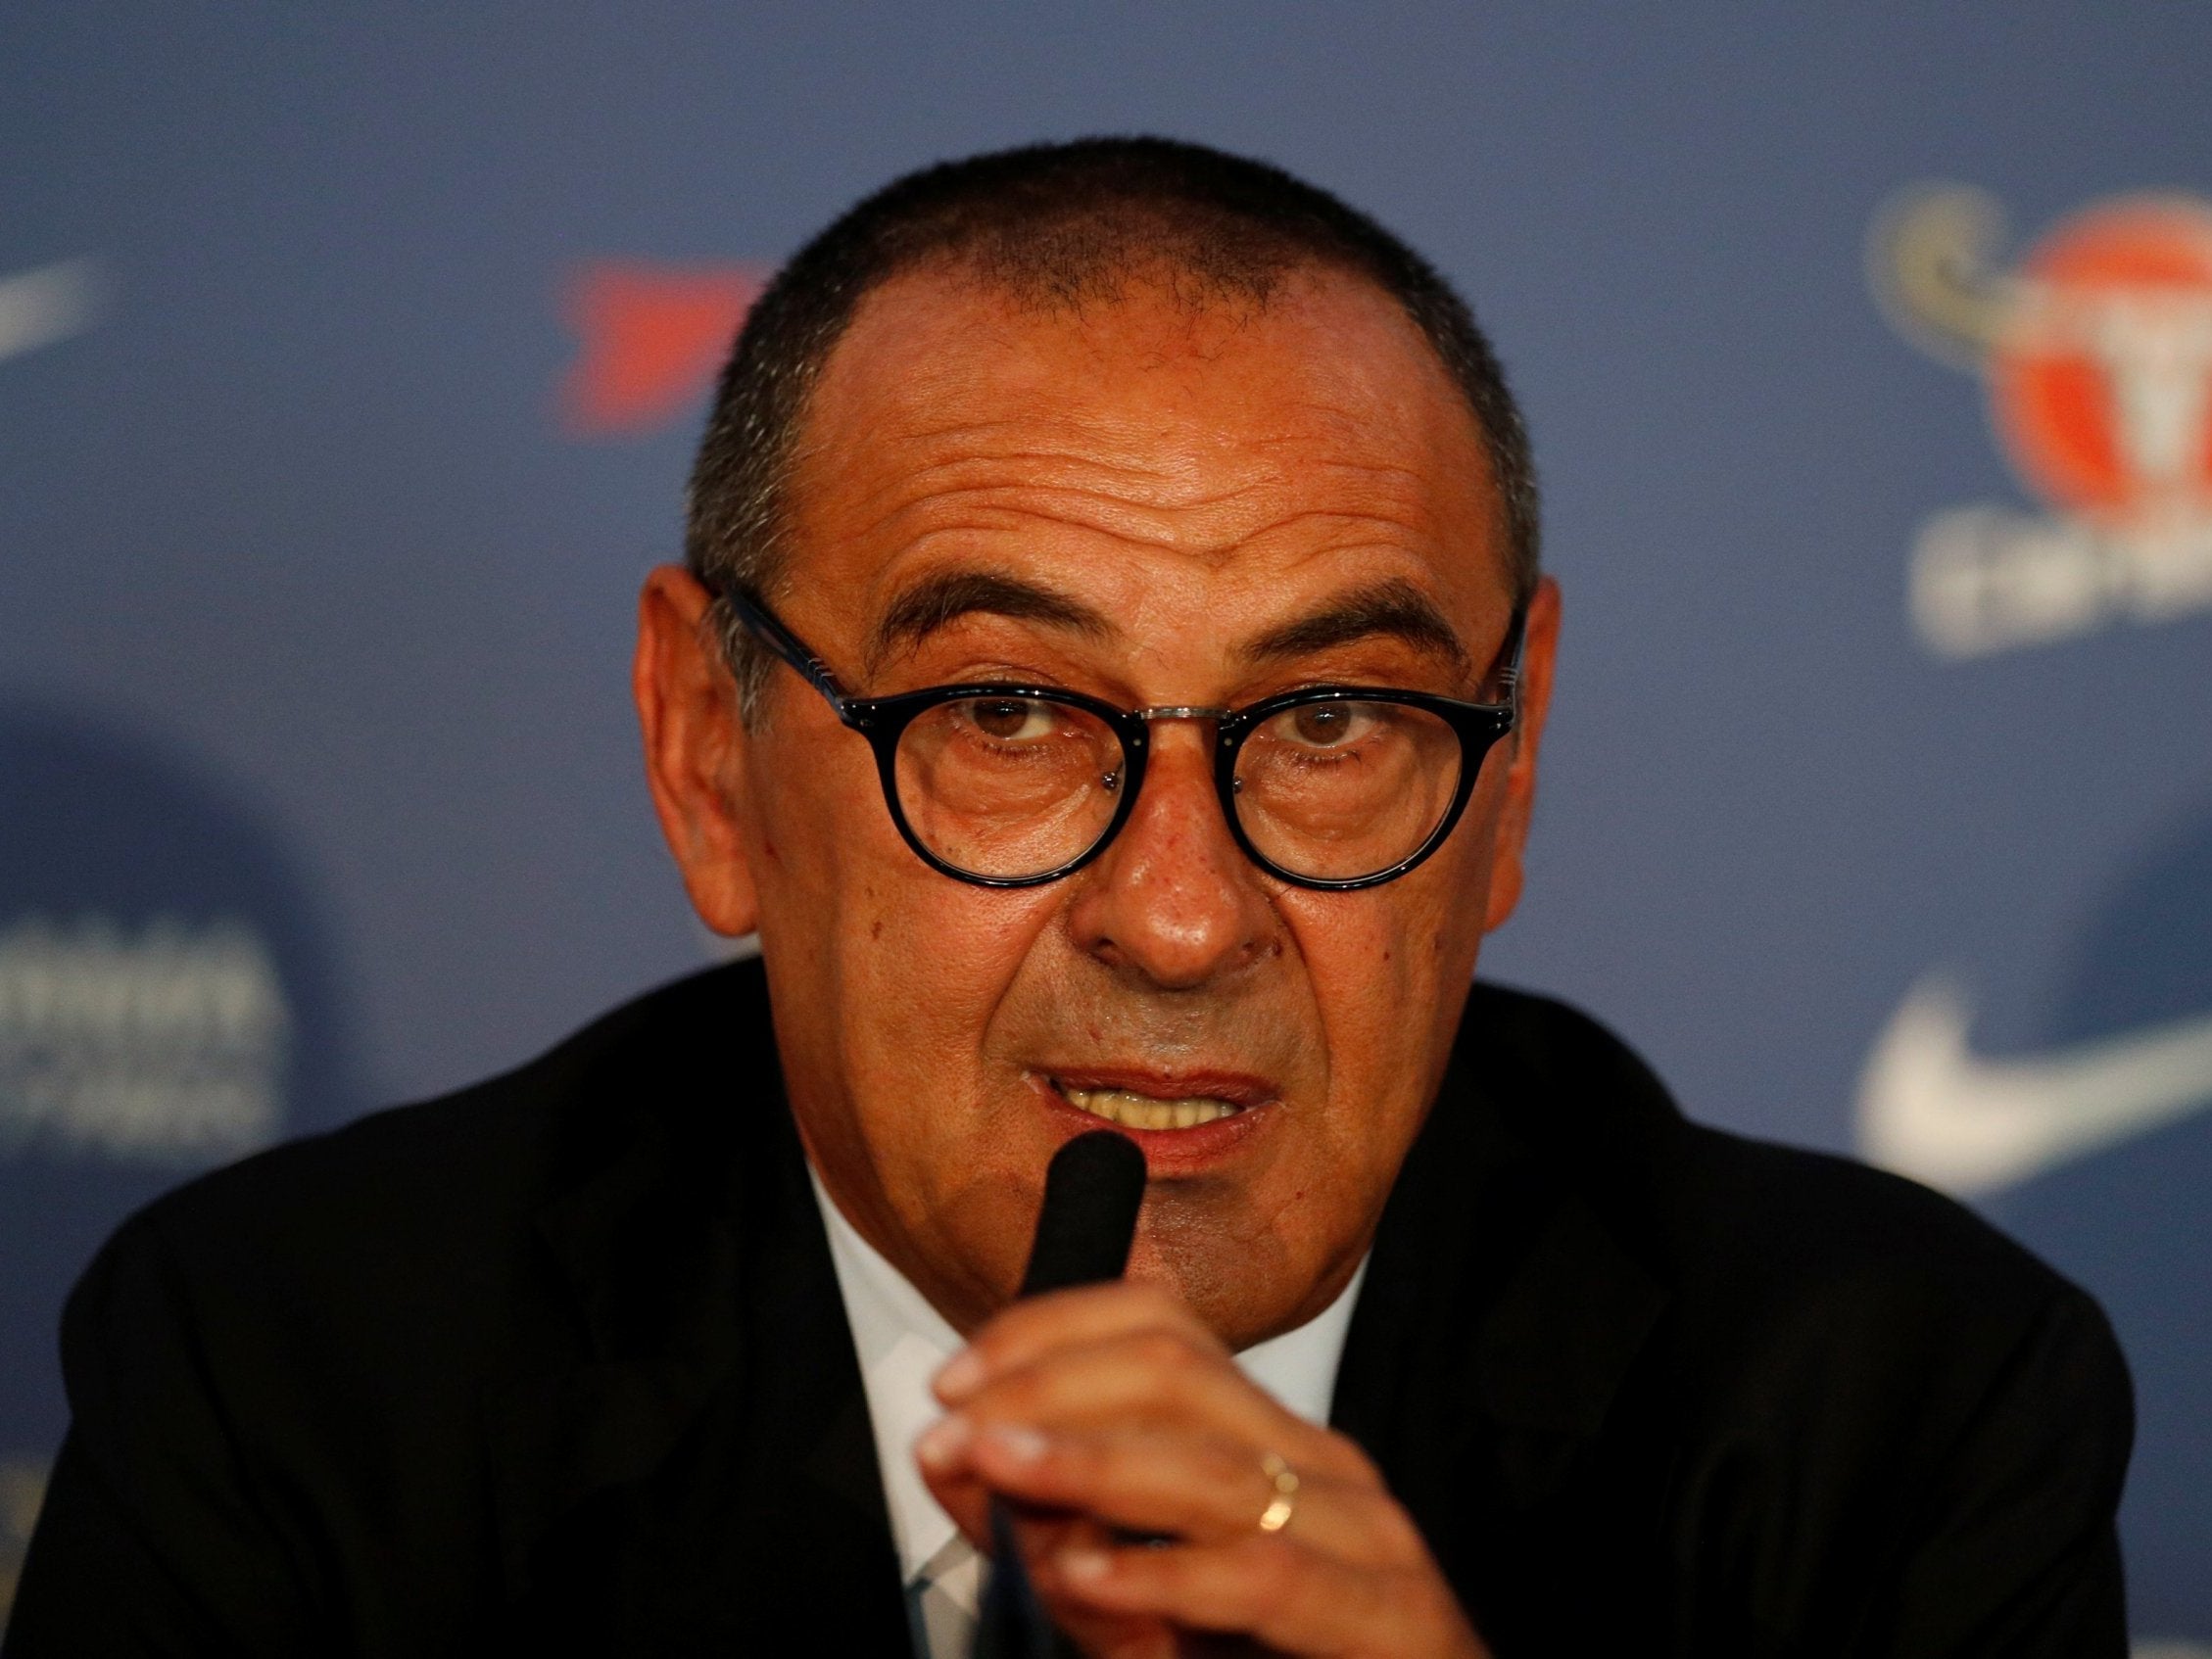 Maurizio Sarri was unveiled as the new Chelsea manager on Wednesday